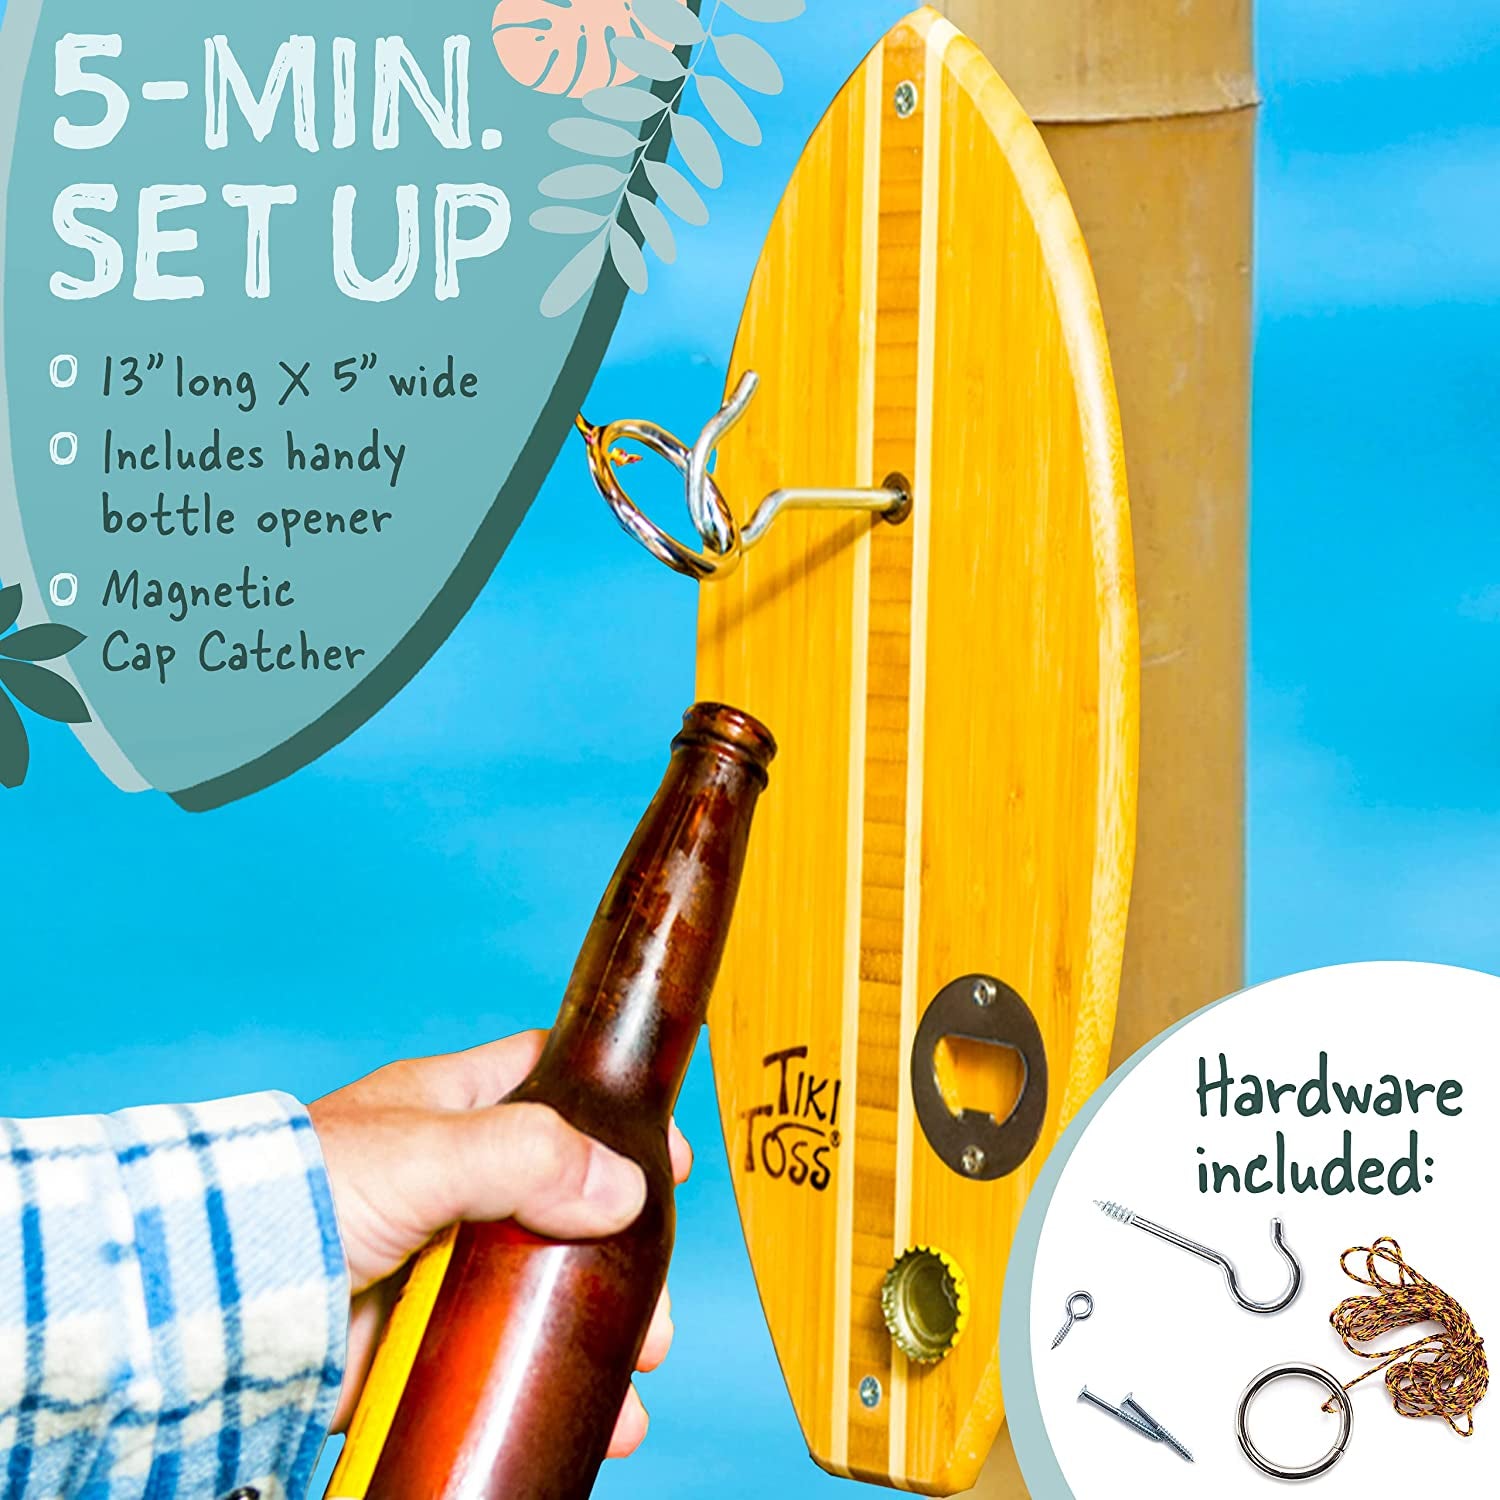 Ring Toss Game for Adults - 13 Inch Surfboard Edition - Hook and Ring Game for Outdoor & Indoor Use, Gifts for Dad, Husband & College Students